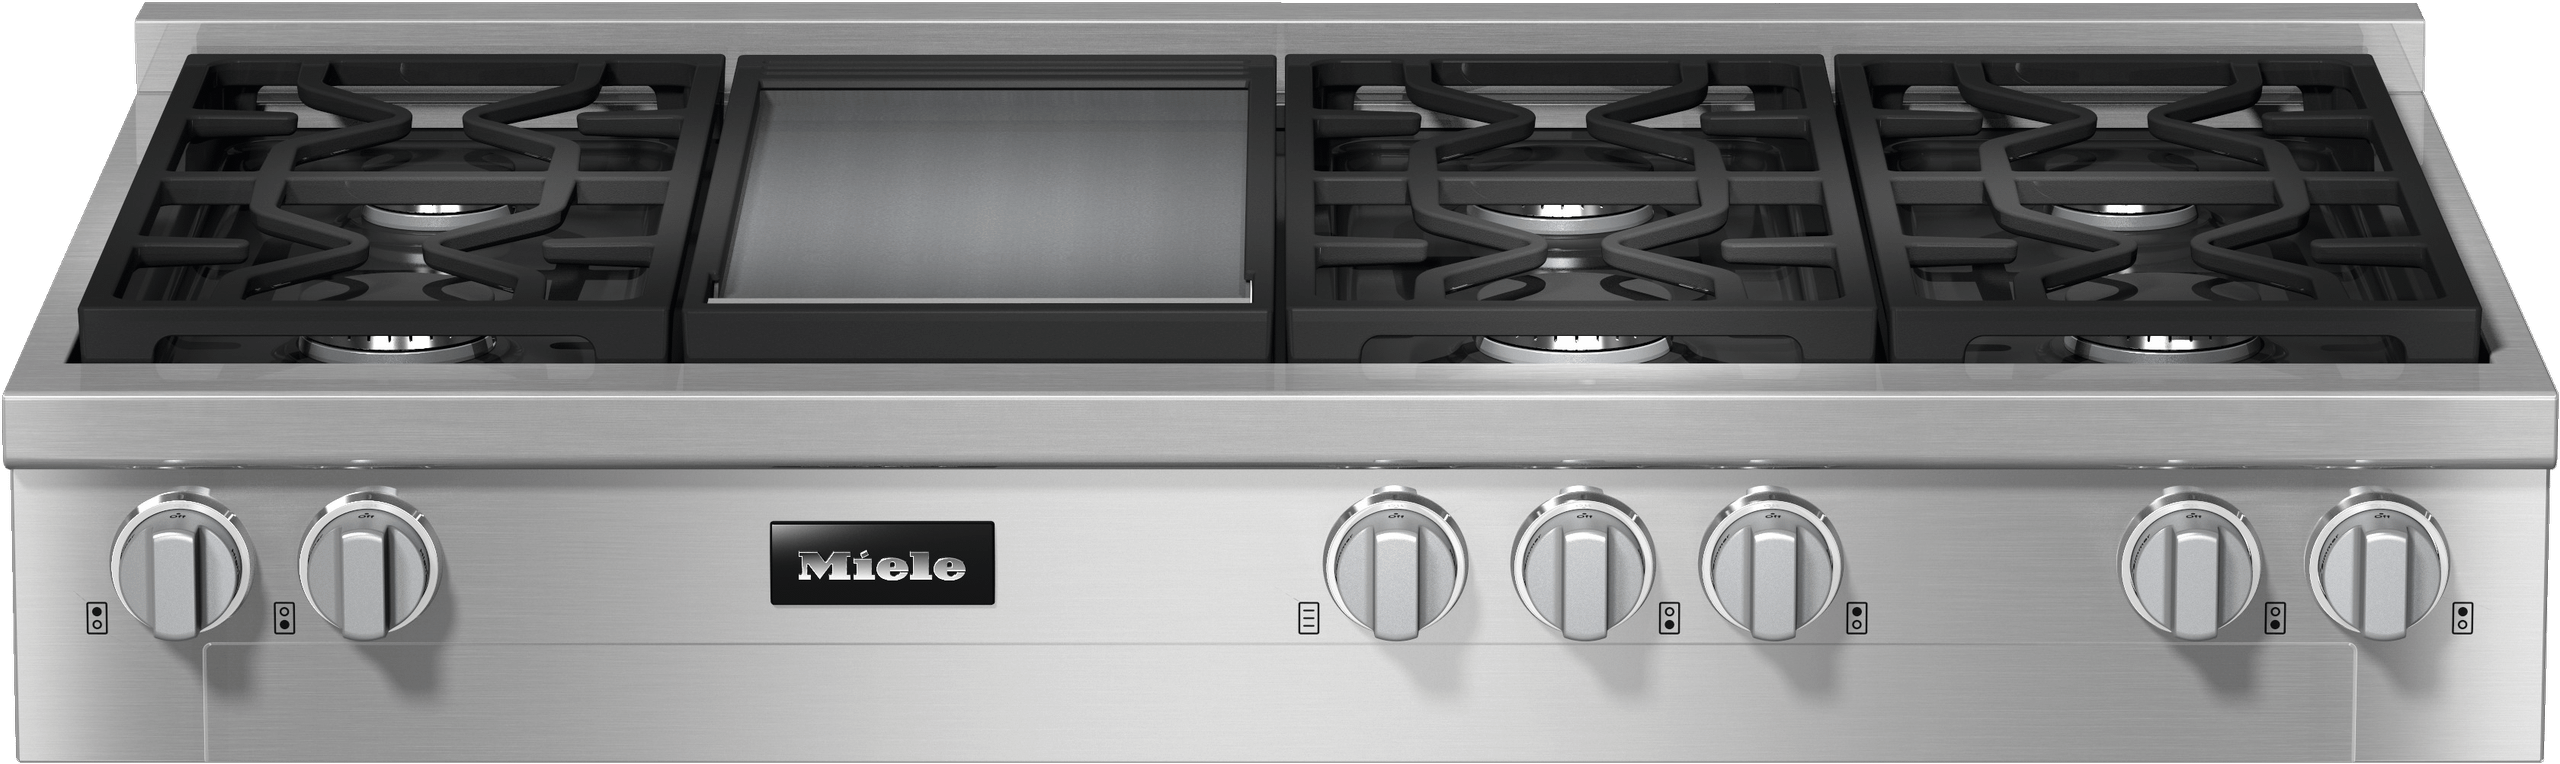 Miele KMR13563GGDEDSTCLSTCLEANSTEEL Kmr 1356-3 G Gd Edst/Clst - Rangetop With Burners And Griddle For Versatility And Performance